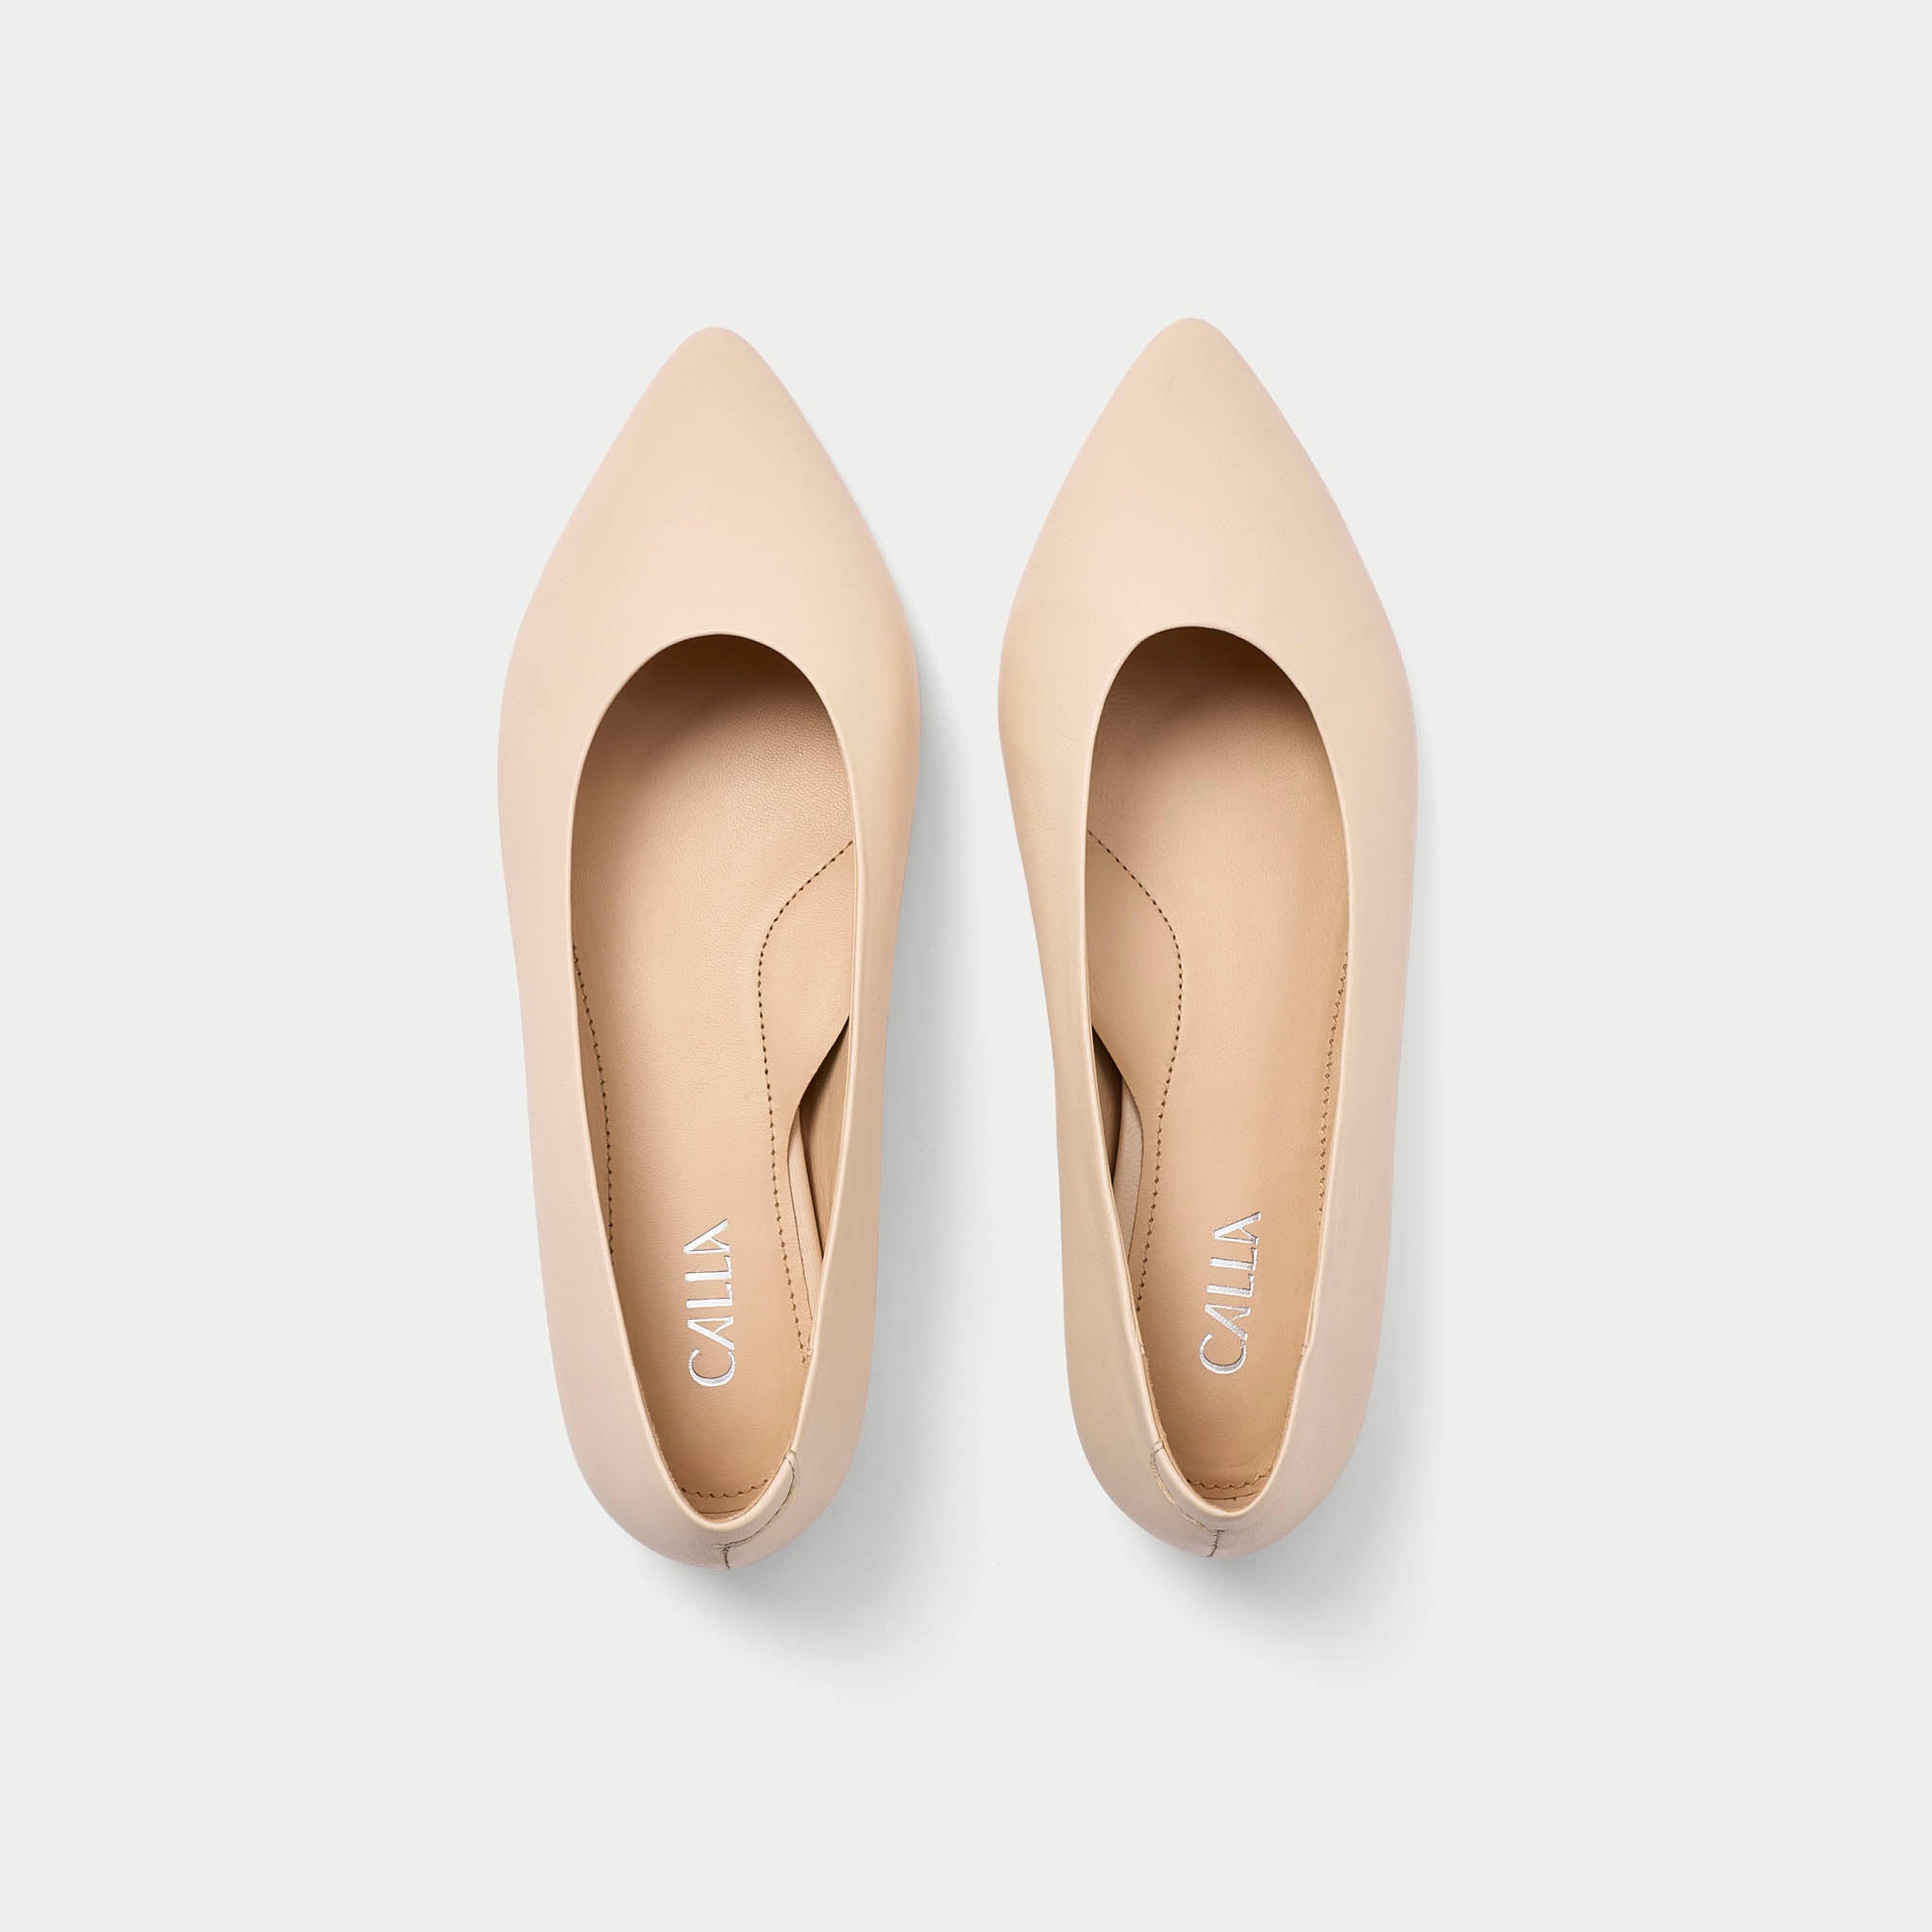 pair of agata butter cream flats for bunions